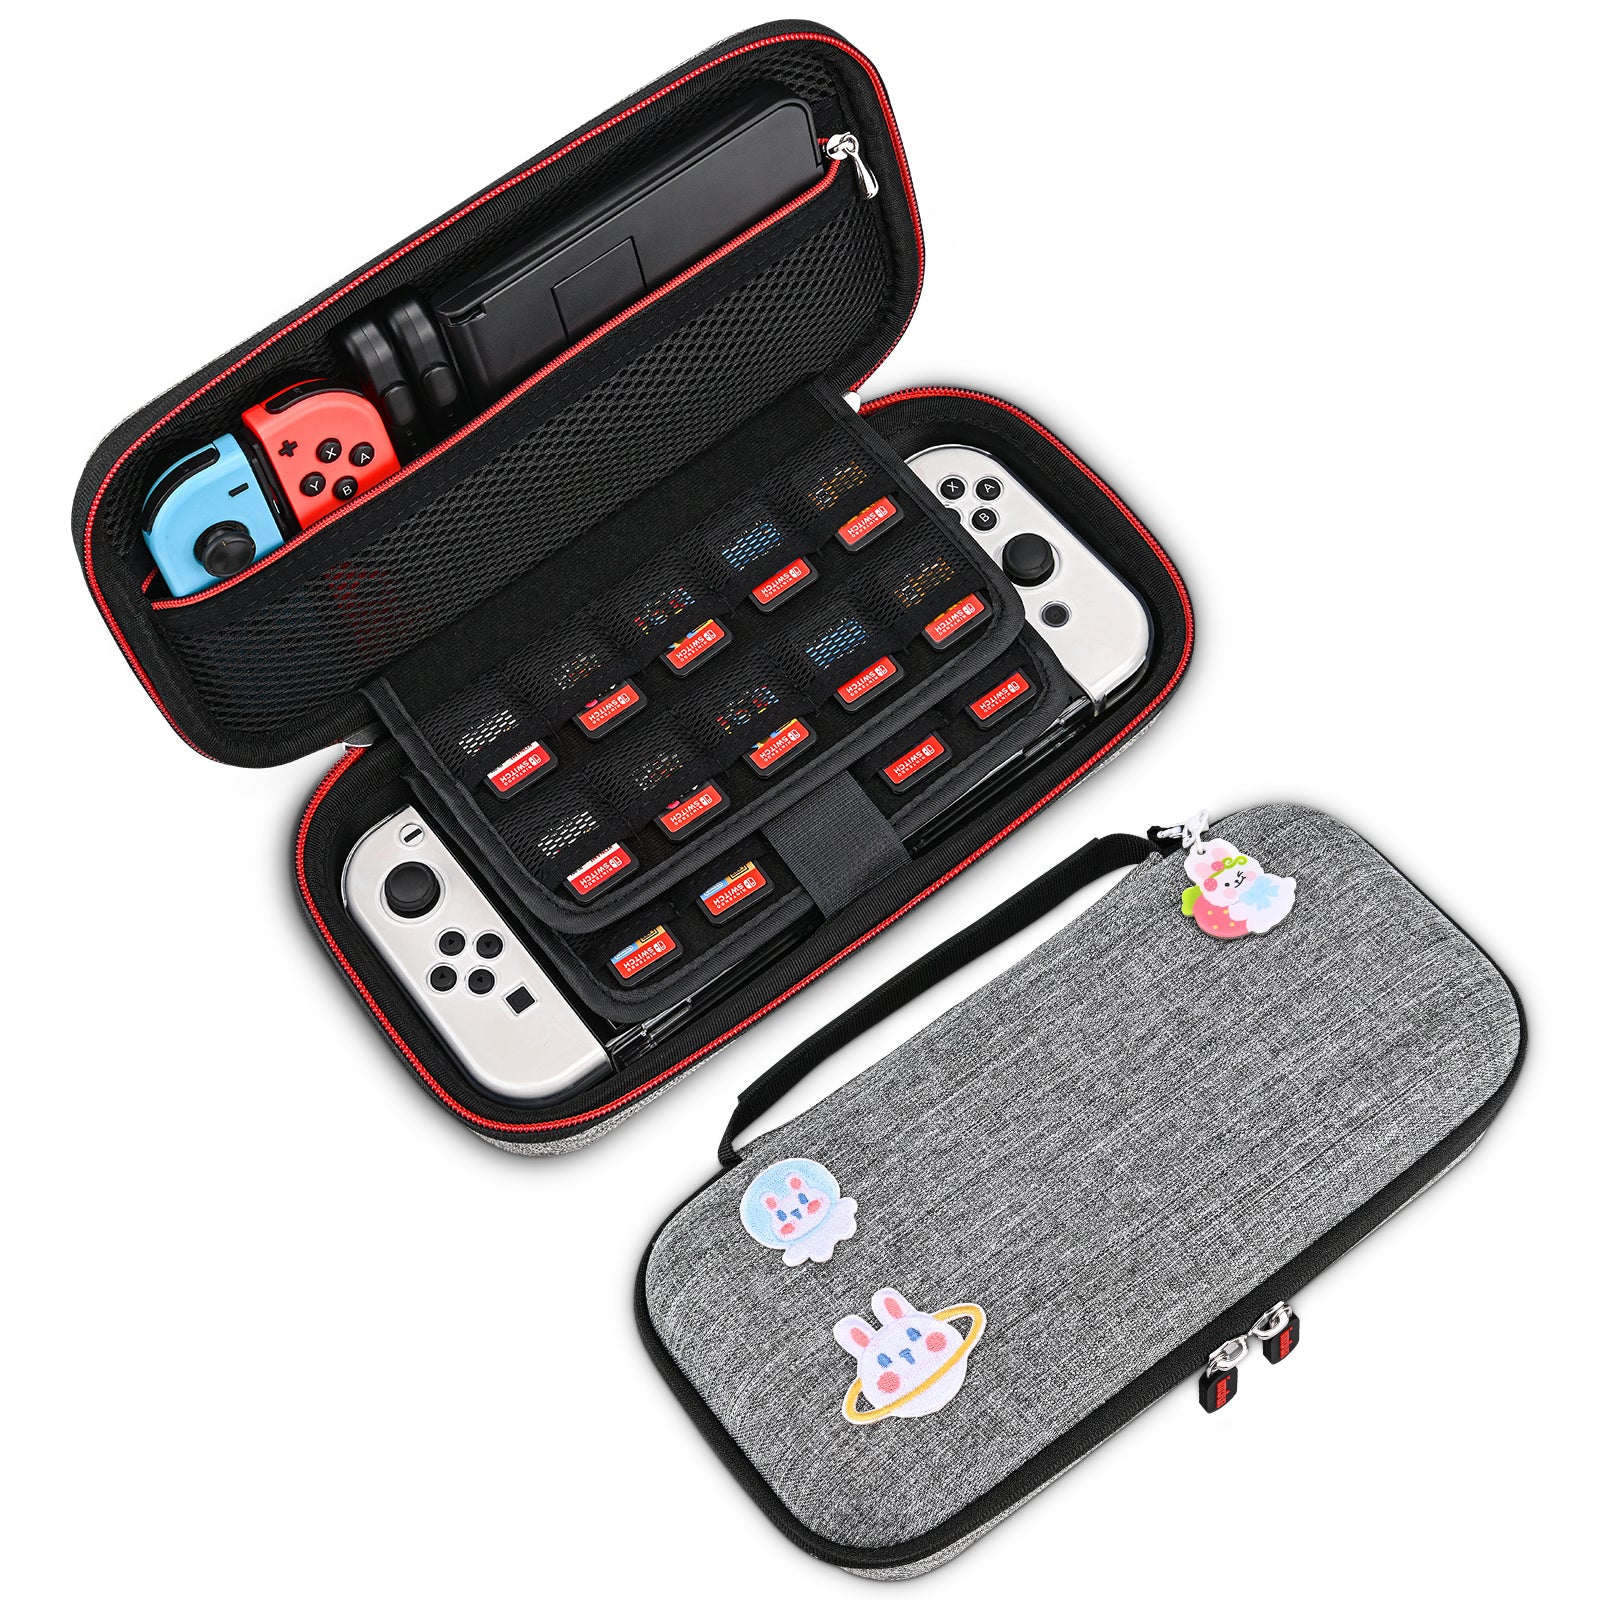 innoAura OLED Carrying Case for Nintendo Switch OLED